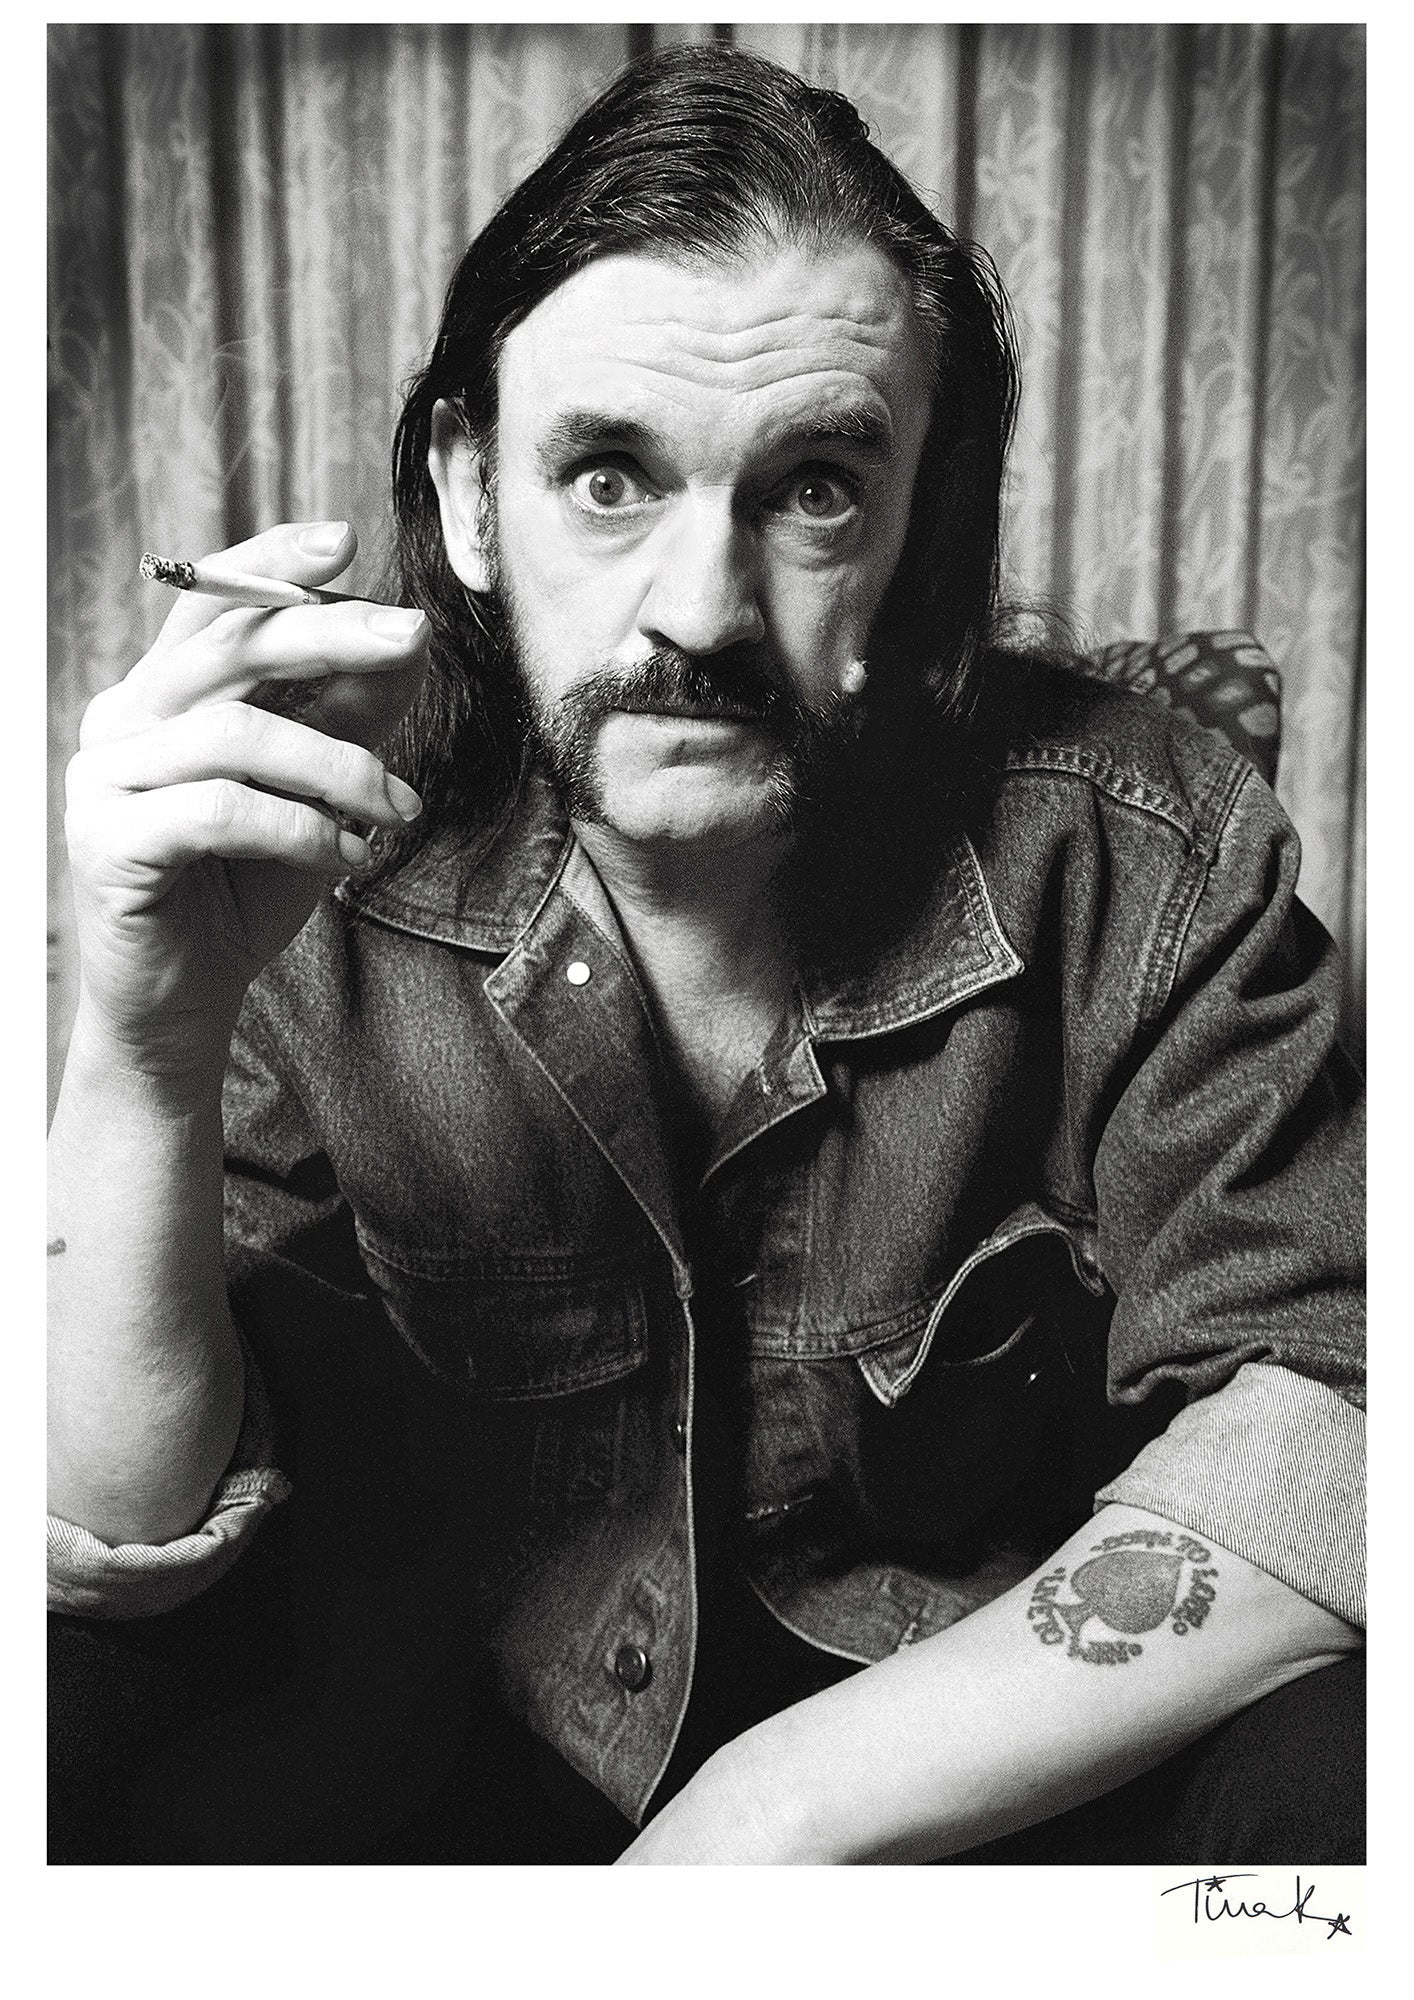 Black and white portrait of Lemmy Kilmister of Motörhead photographed for the 100th issue of Terrorizer magazine at the Mandarin Oriental Hyde Park, London, 2002